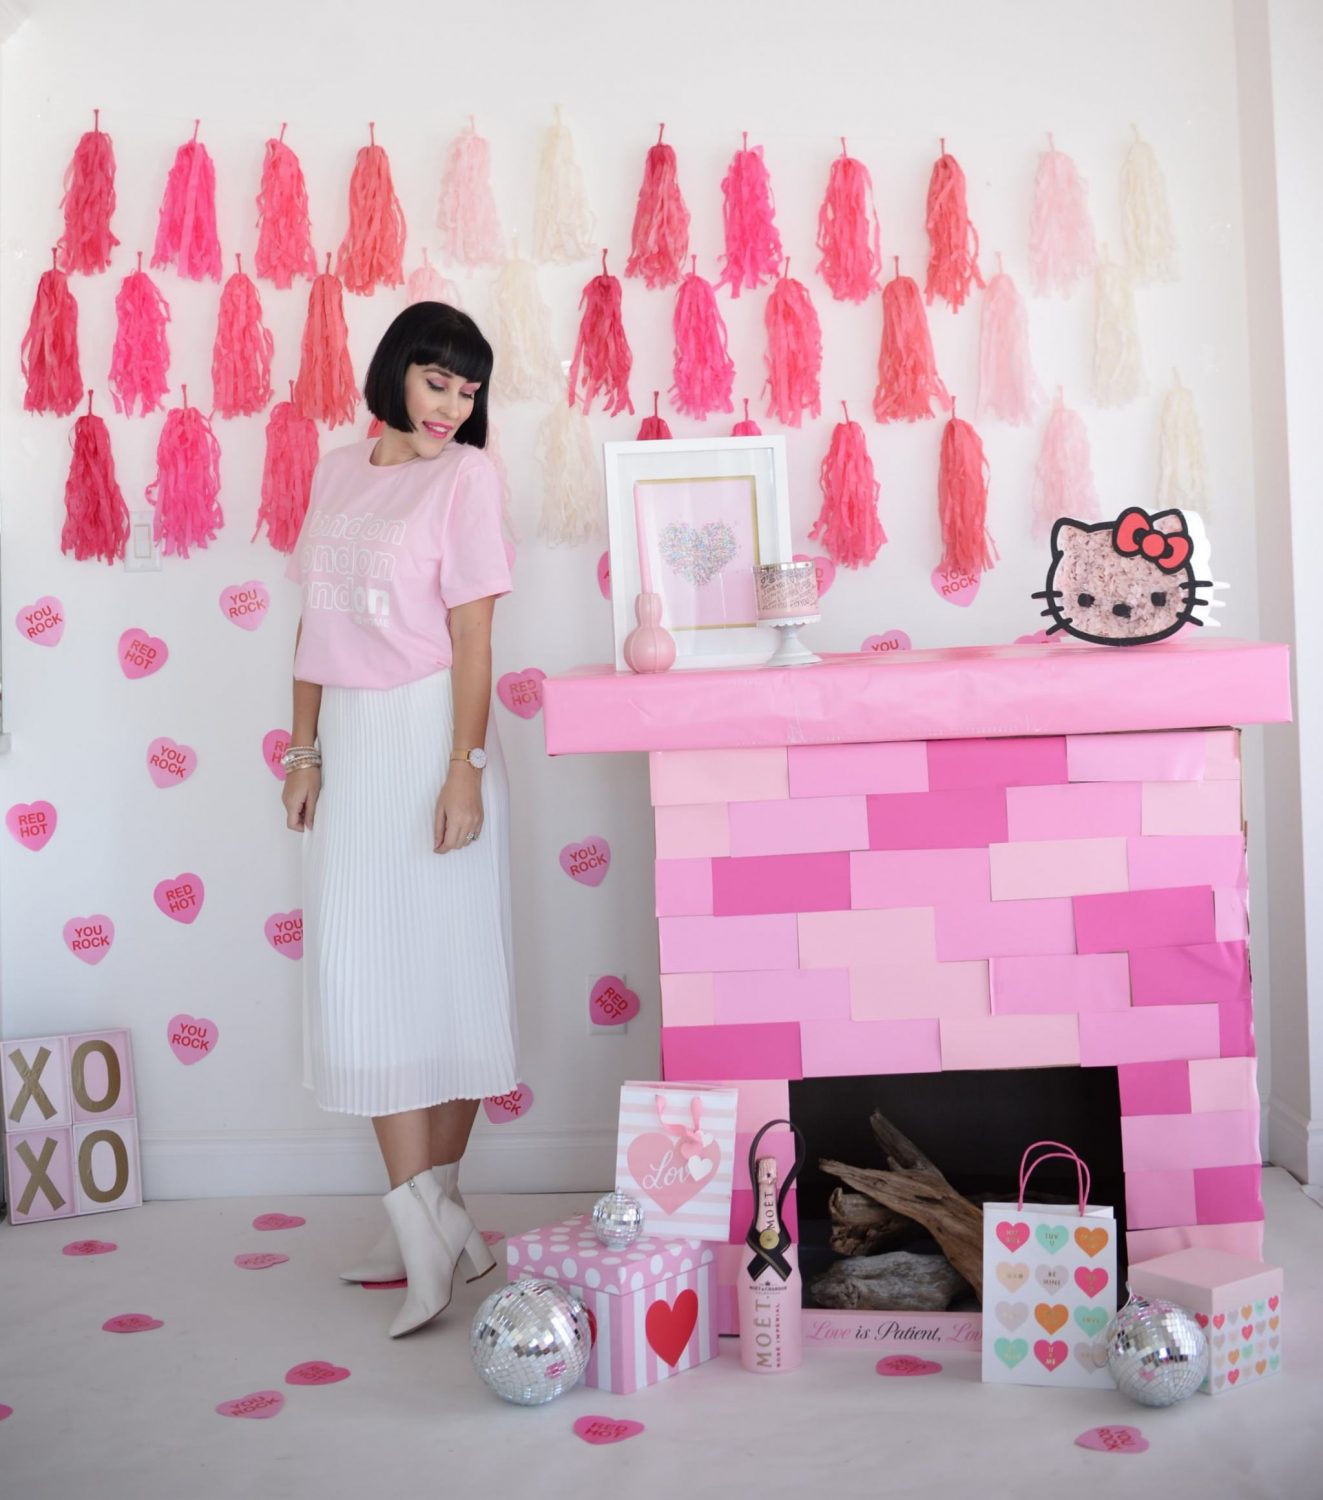  Tips for Styling Pink This Valentine’s Day